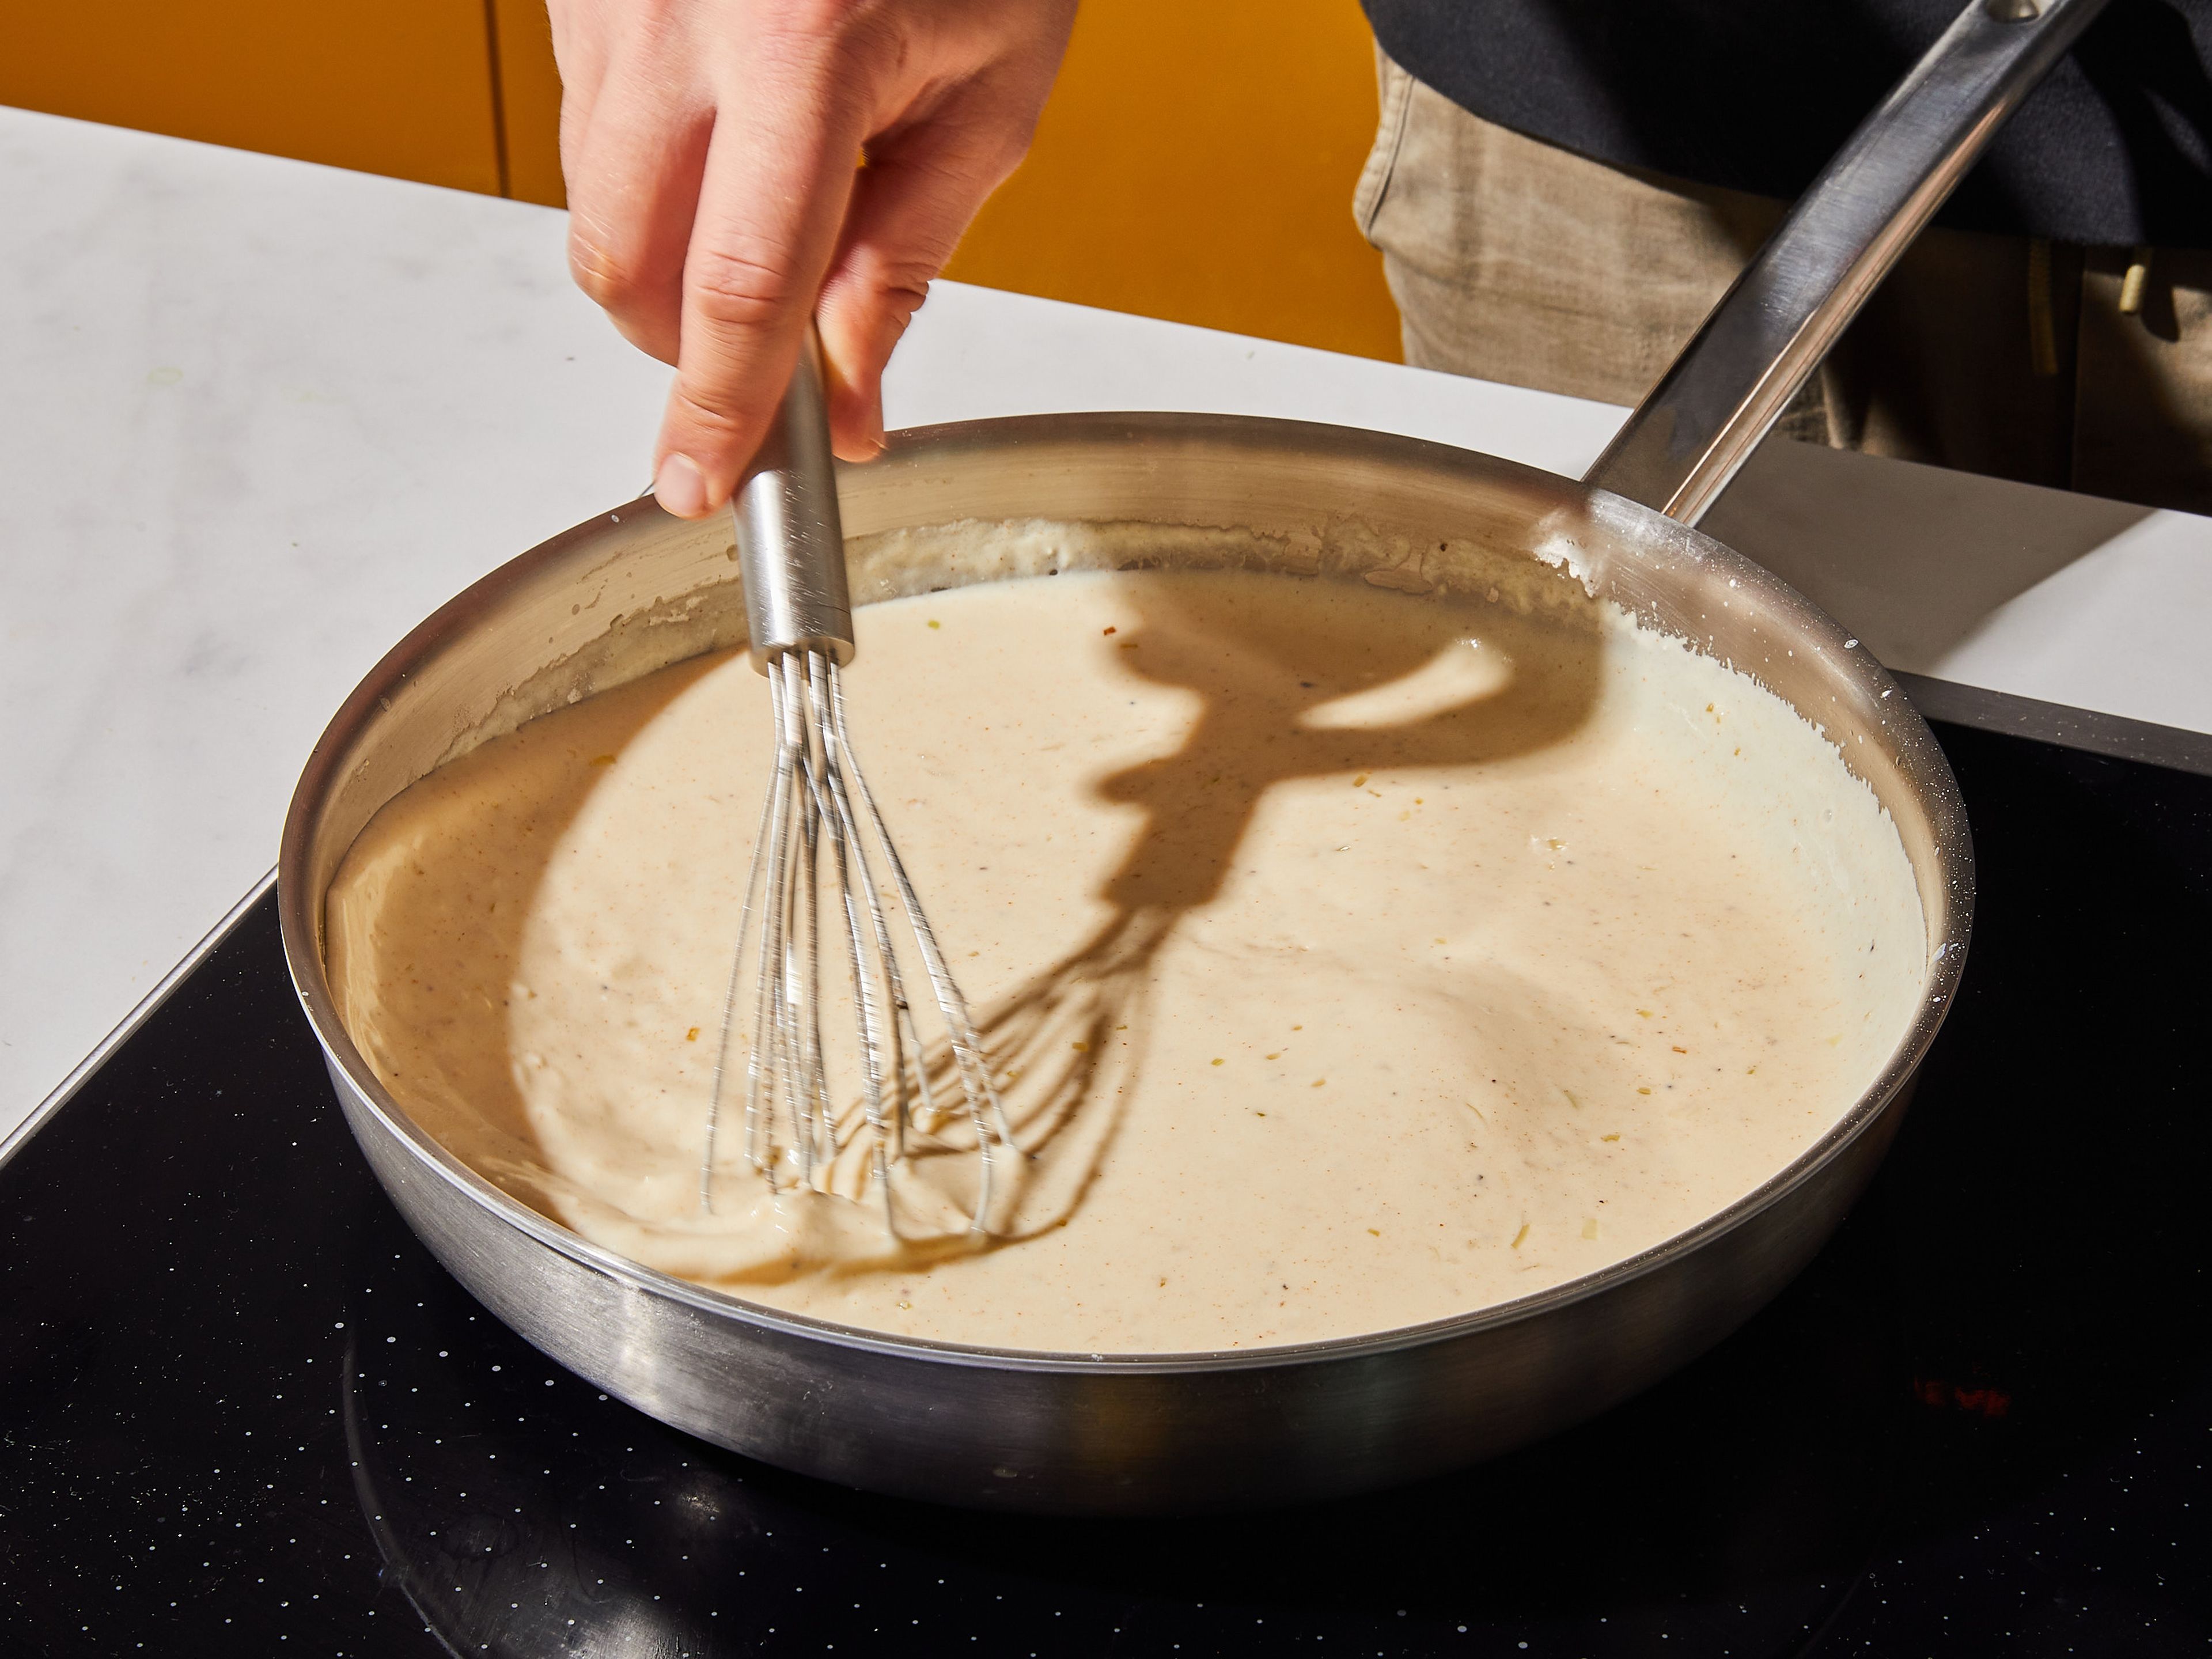 Add butter to a frying pan set over medium-high heat, once melted, add the onions and garlic and sauté. Stir in the flour. Gradually pour in the milk and continue stirring until thickened.